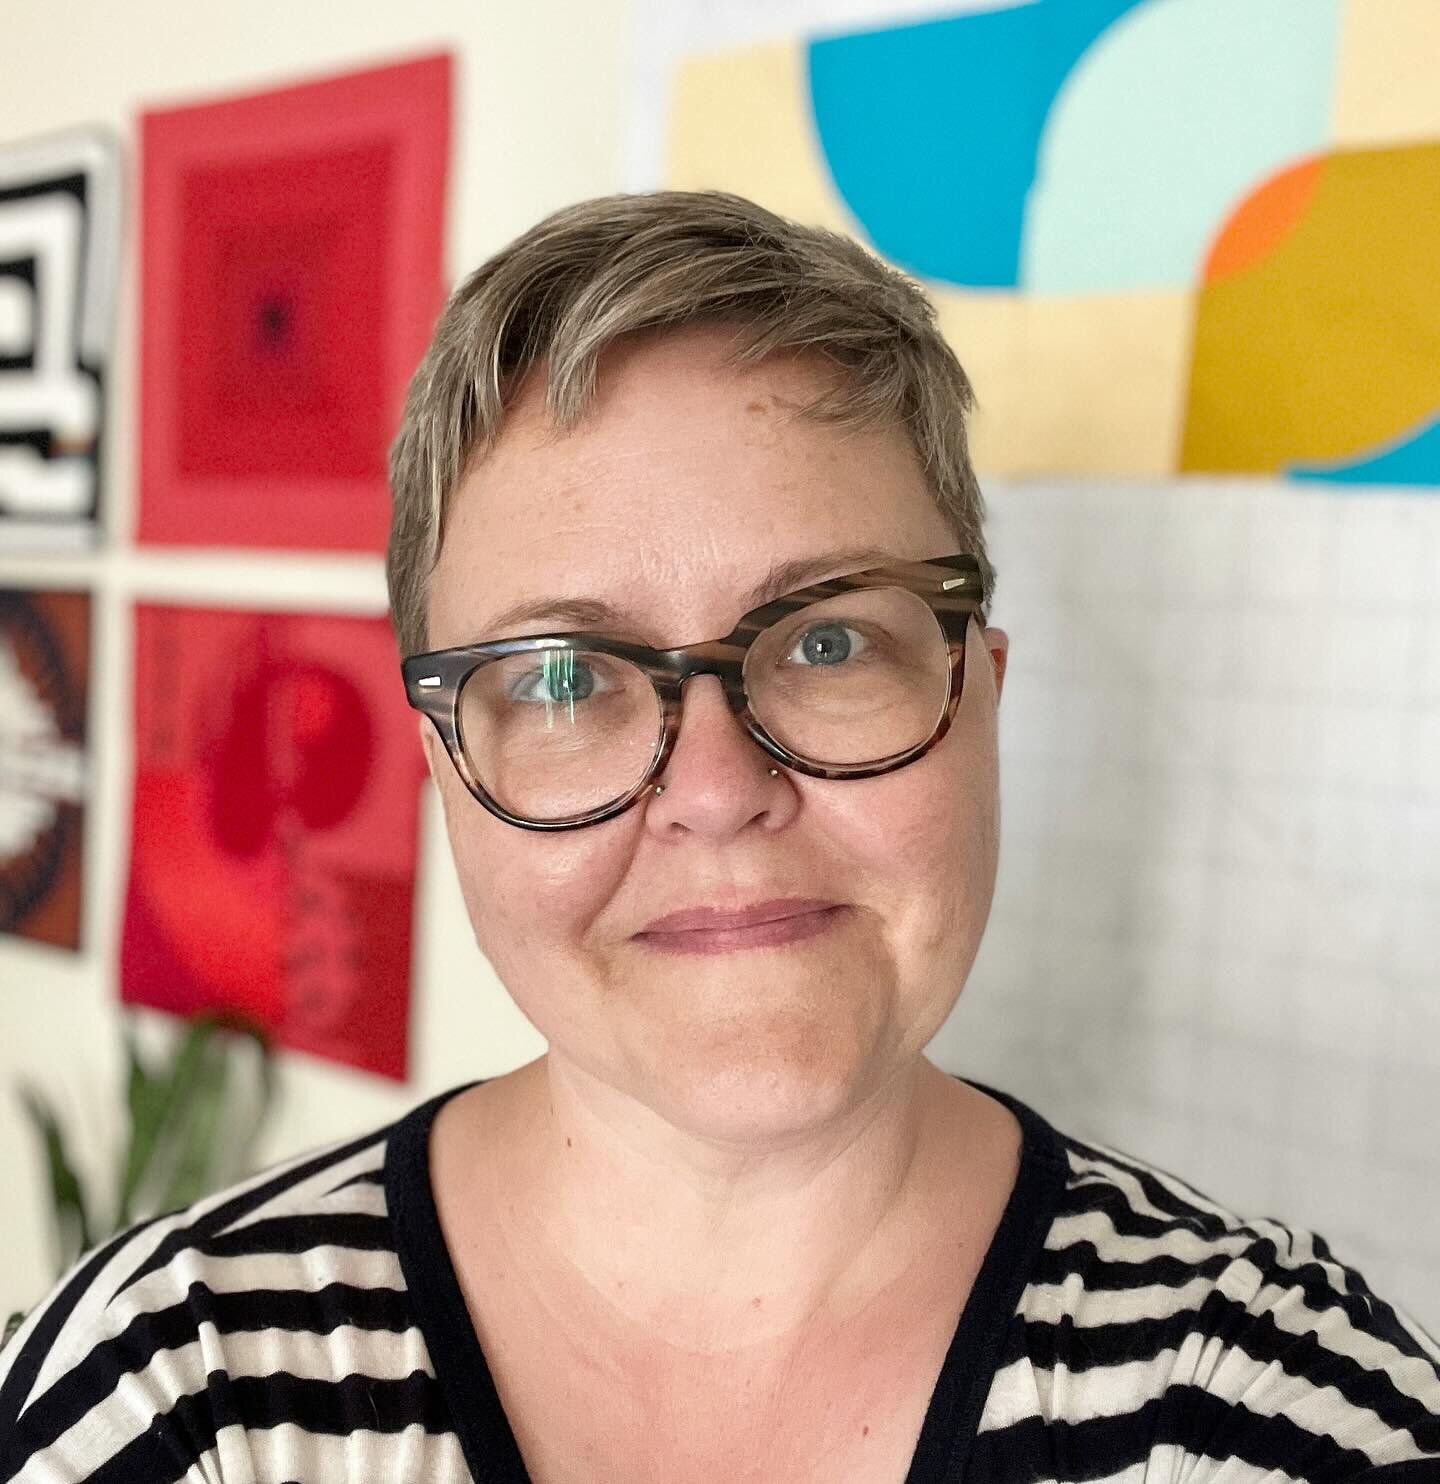 Hi #igquiltfest 👋

My name is Heather. Colorful quilts and my Chief Quilting Assistant, Moira, are two of my favorite things. Swipe to see Moira in action.

I&rsquo;m a marketer by day and a quilter every other minute of every day. It&rsquo;s how I 